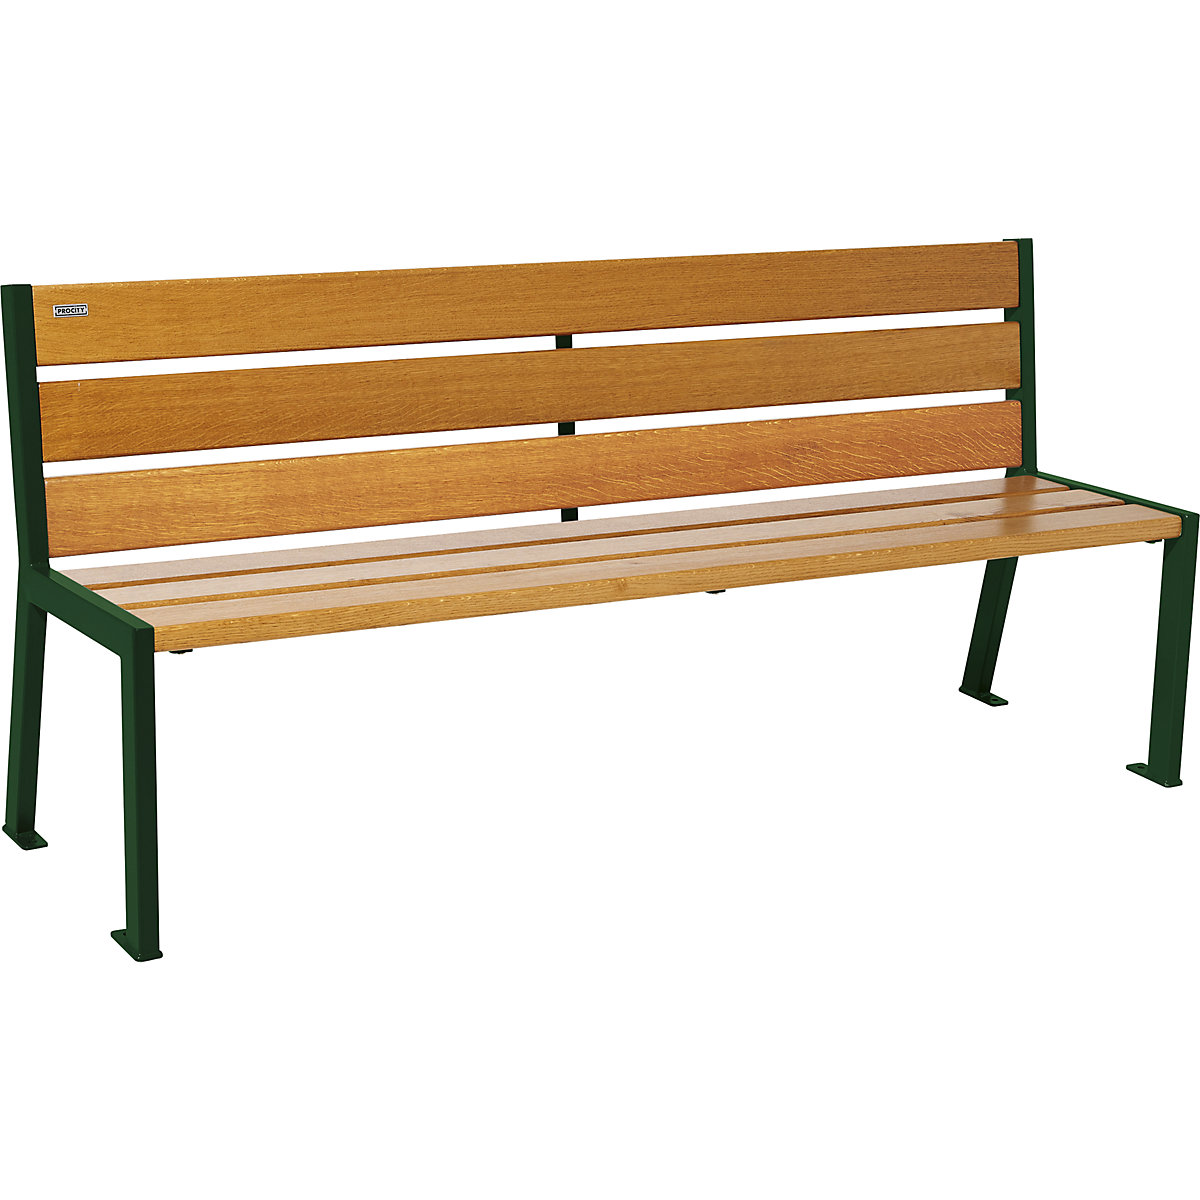 SILAOS® bench made of wood – PROCITY, with back rest, length 1800 mm, moss green RAL 6005, light oak finish-7